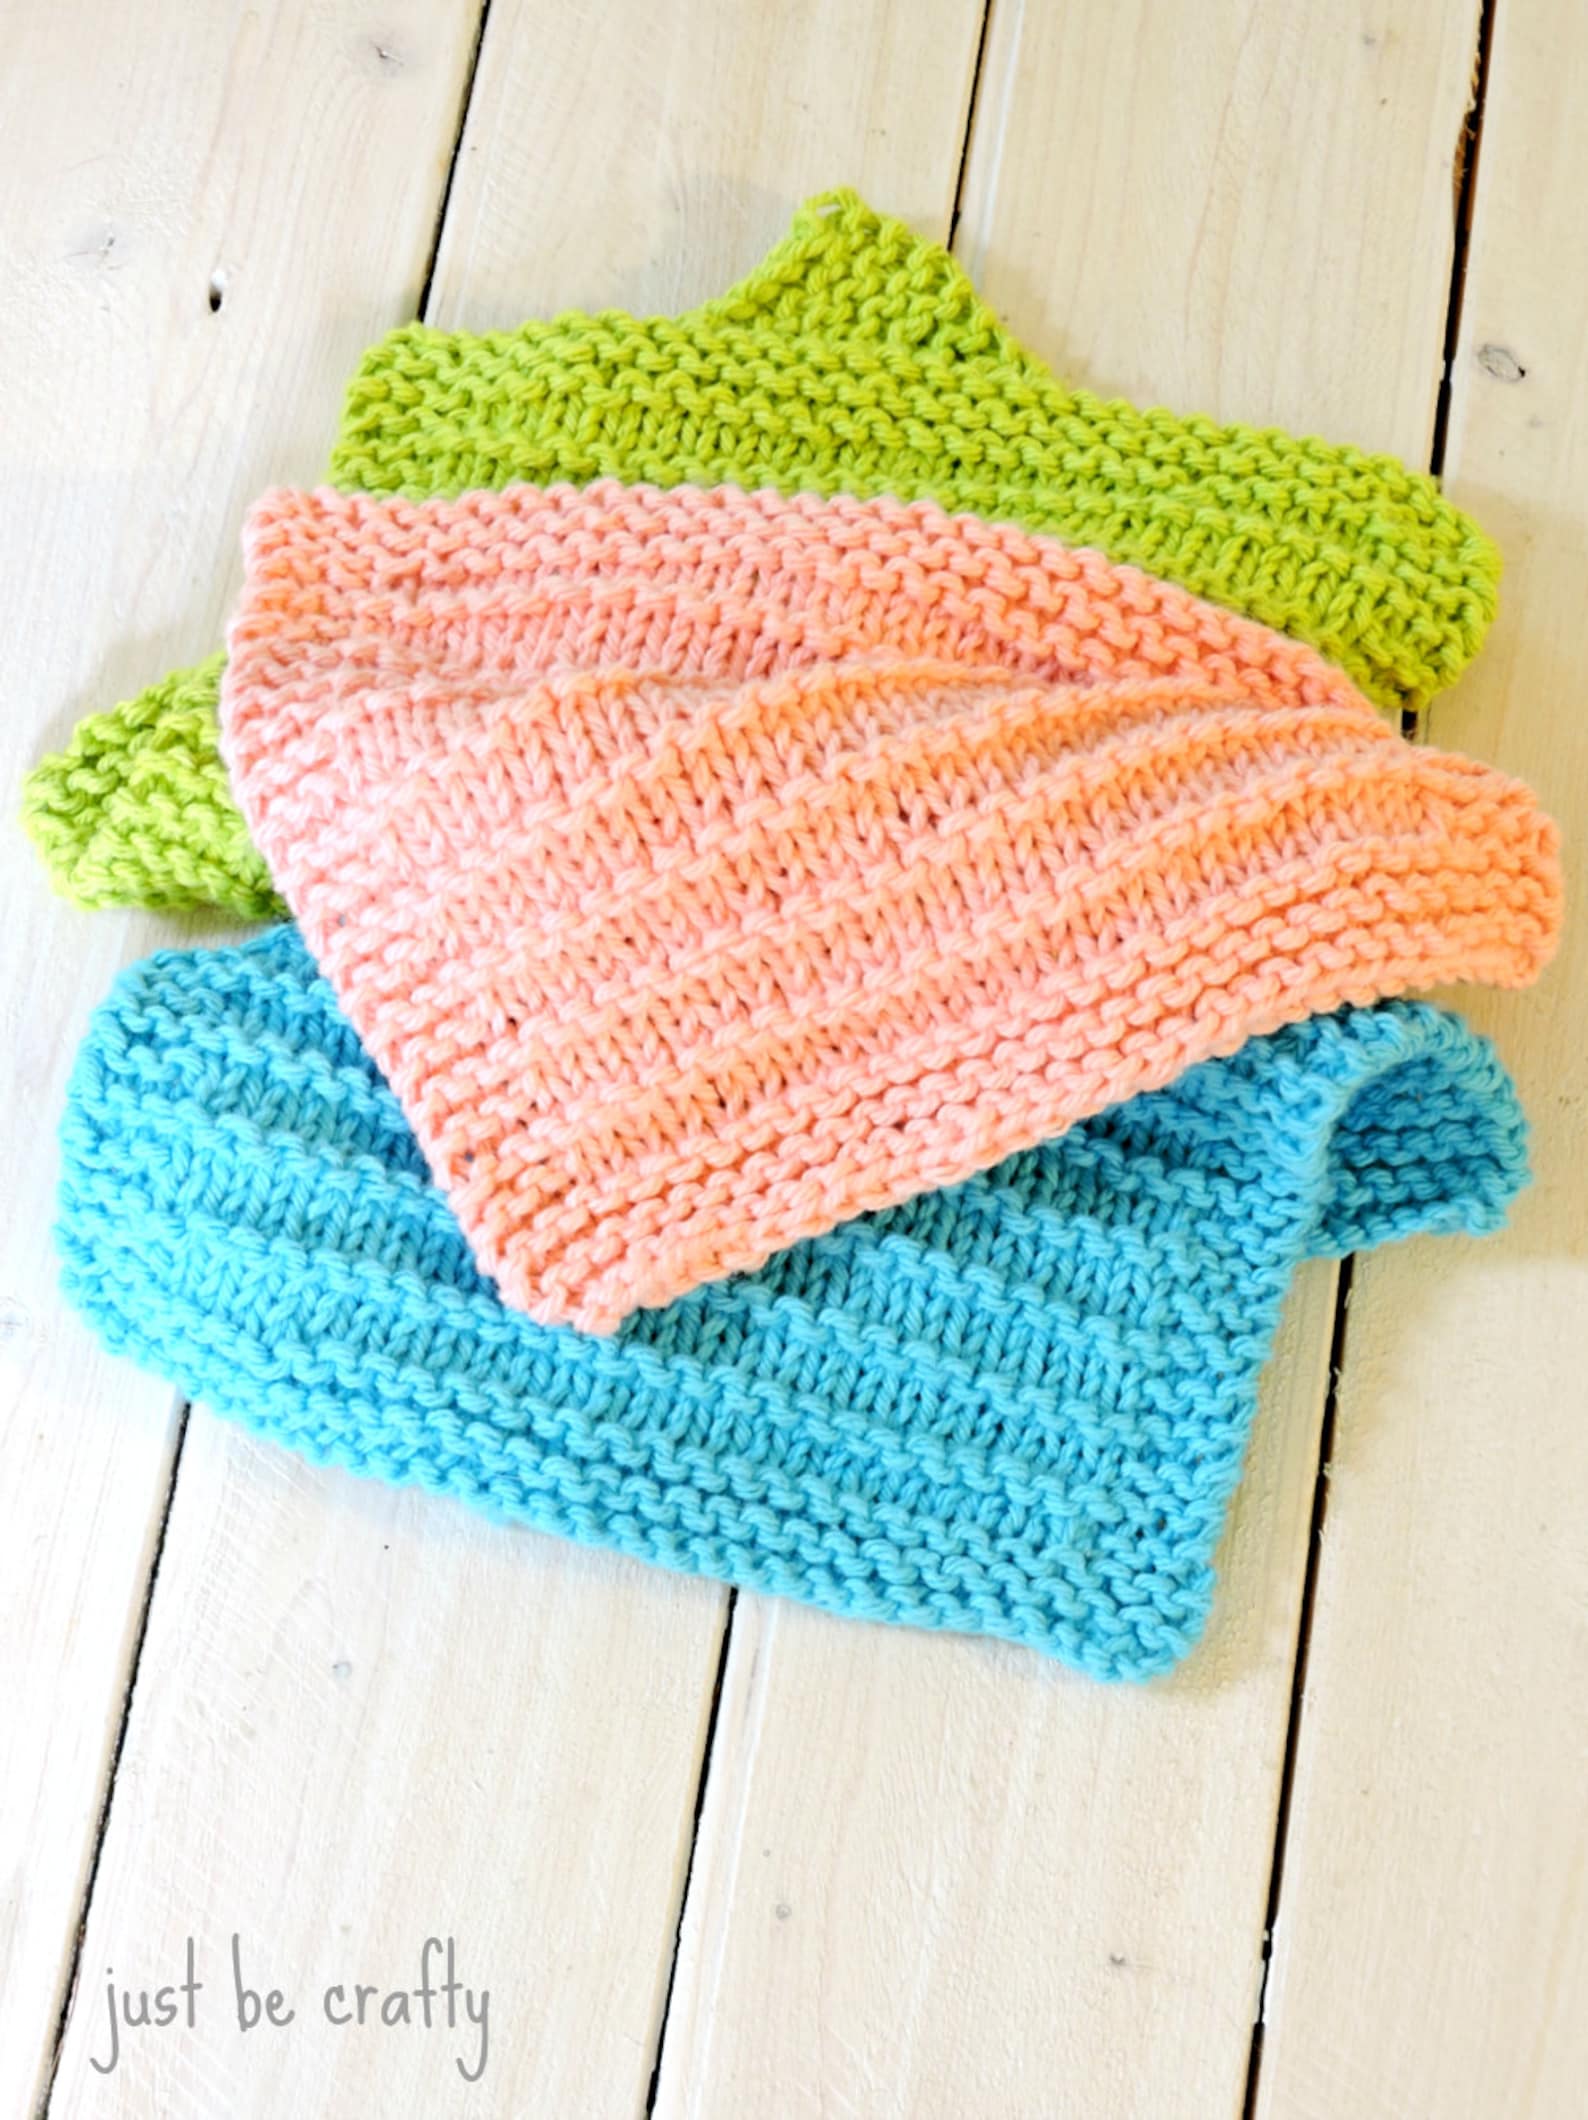 10-knit-dishcloth-patterns-for-beginners